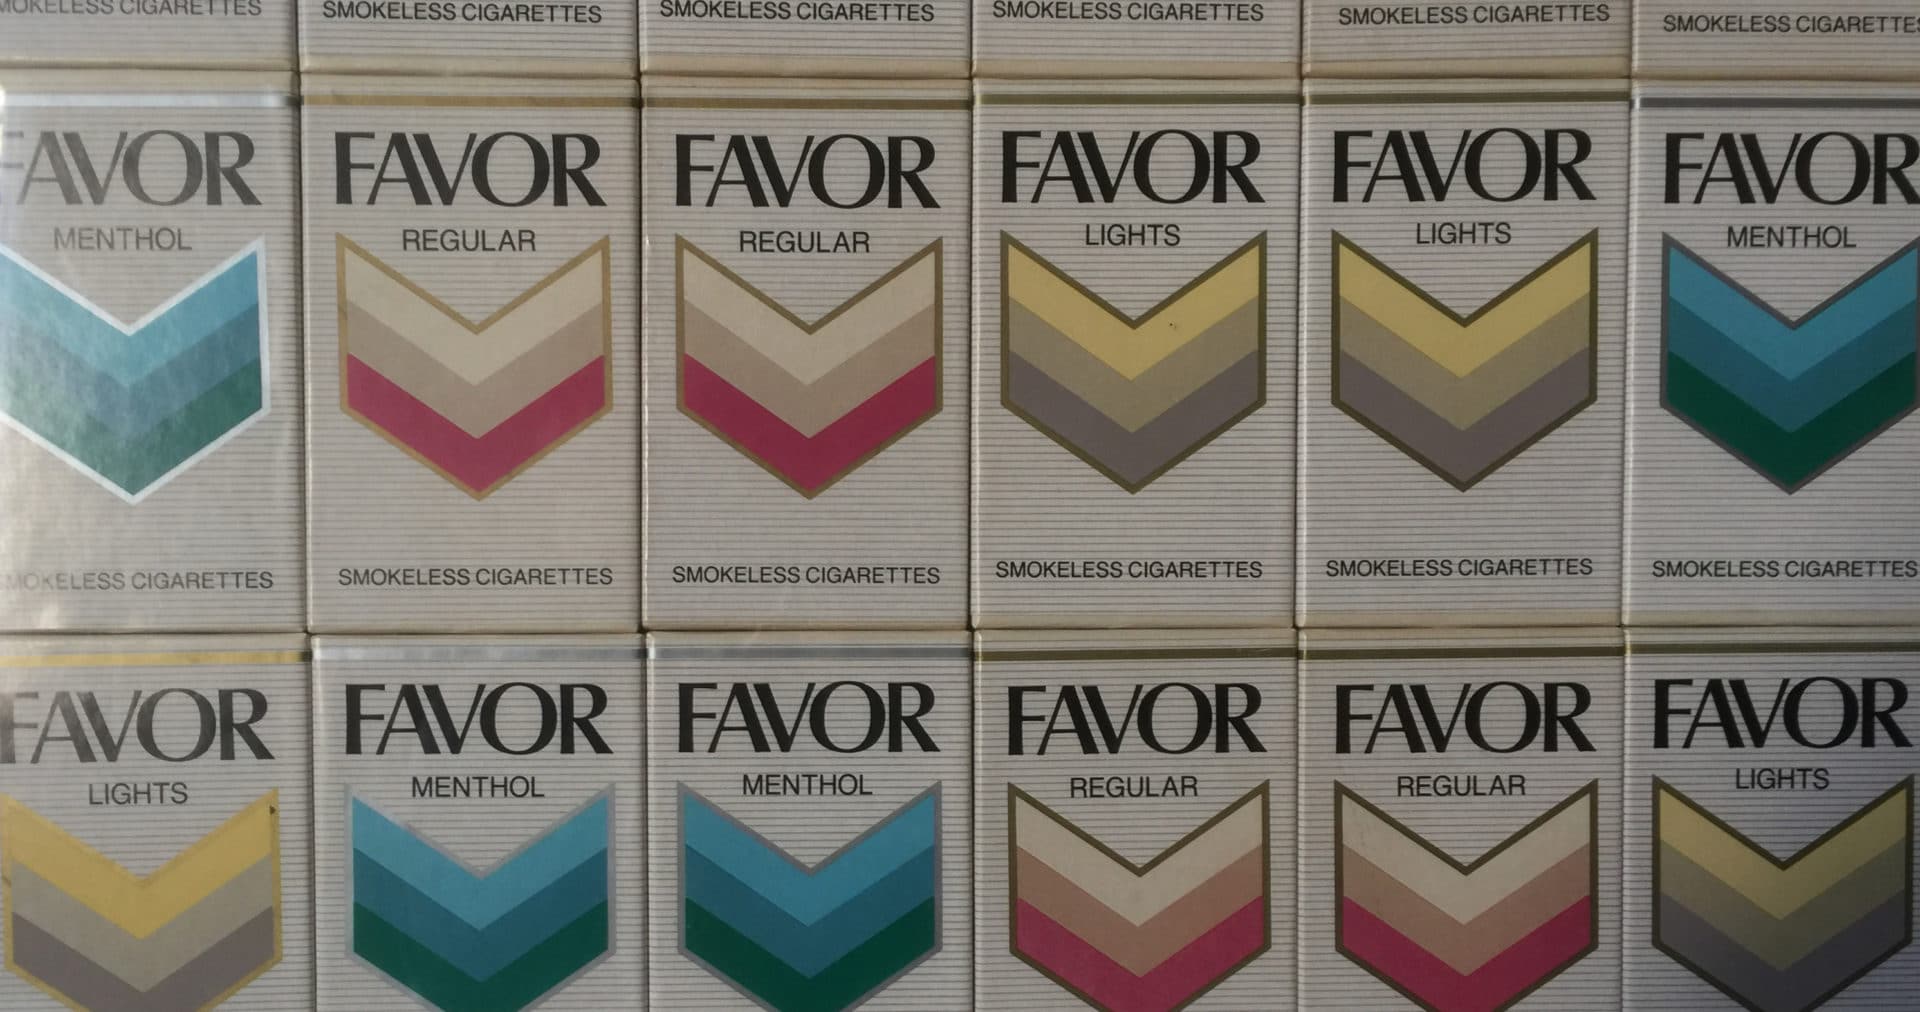 FAVORⓇ SMOKELESS CIGARETTES, Photograph by Brenda Coffee, ©1010ParkPlace, 2018